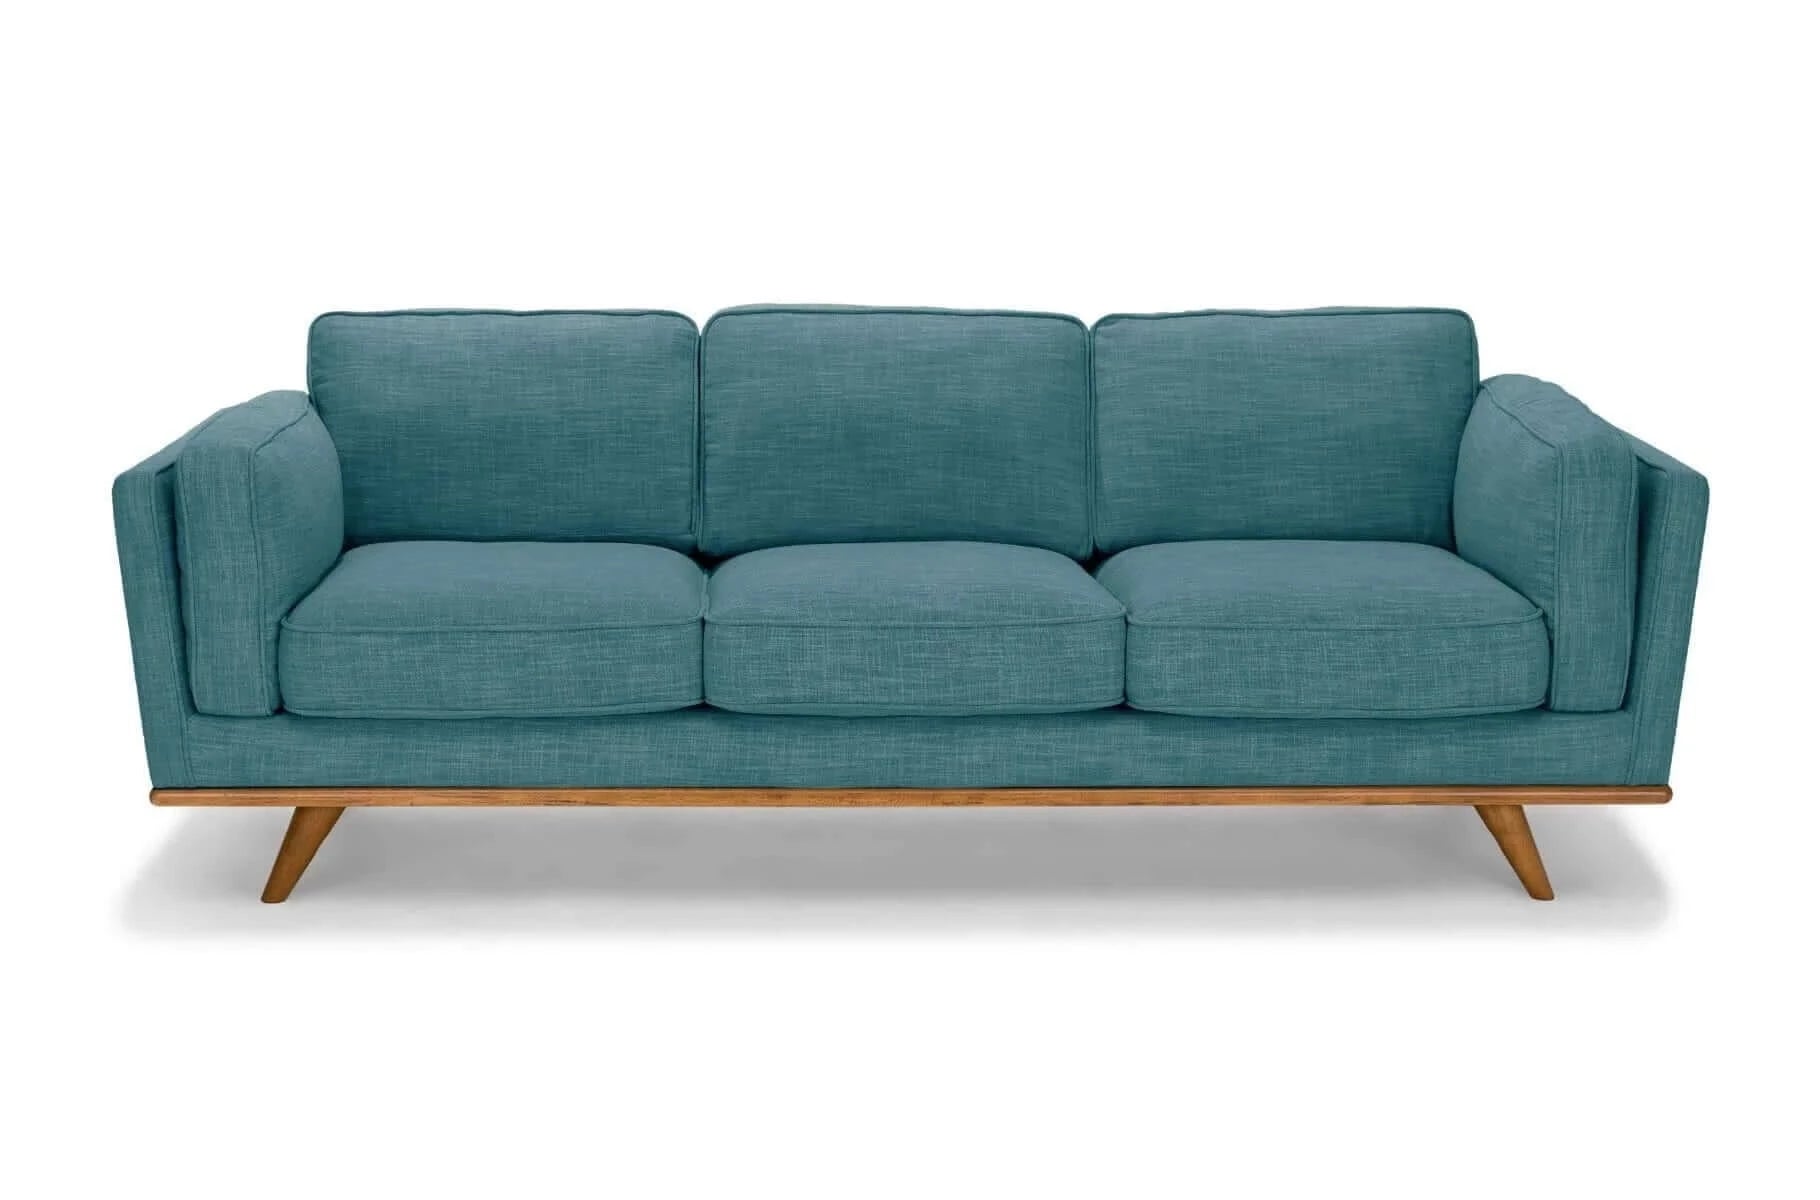 Buy 3 Seater Sofa Teal Fabric Lounge Set for Living Room Couch – Upinteriors-Upinteriors